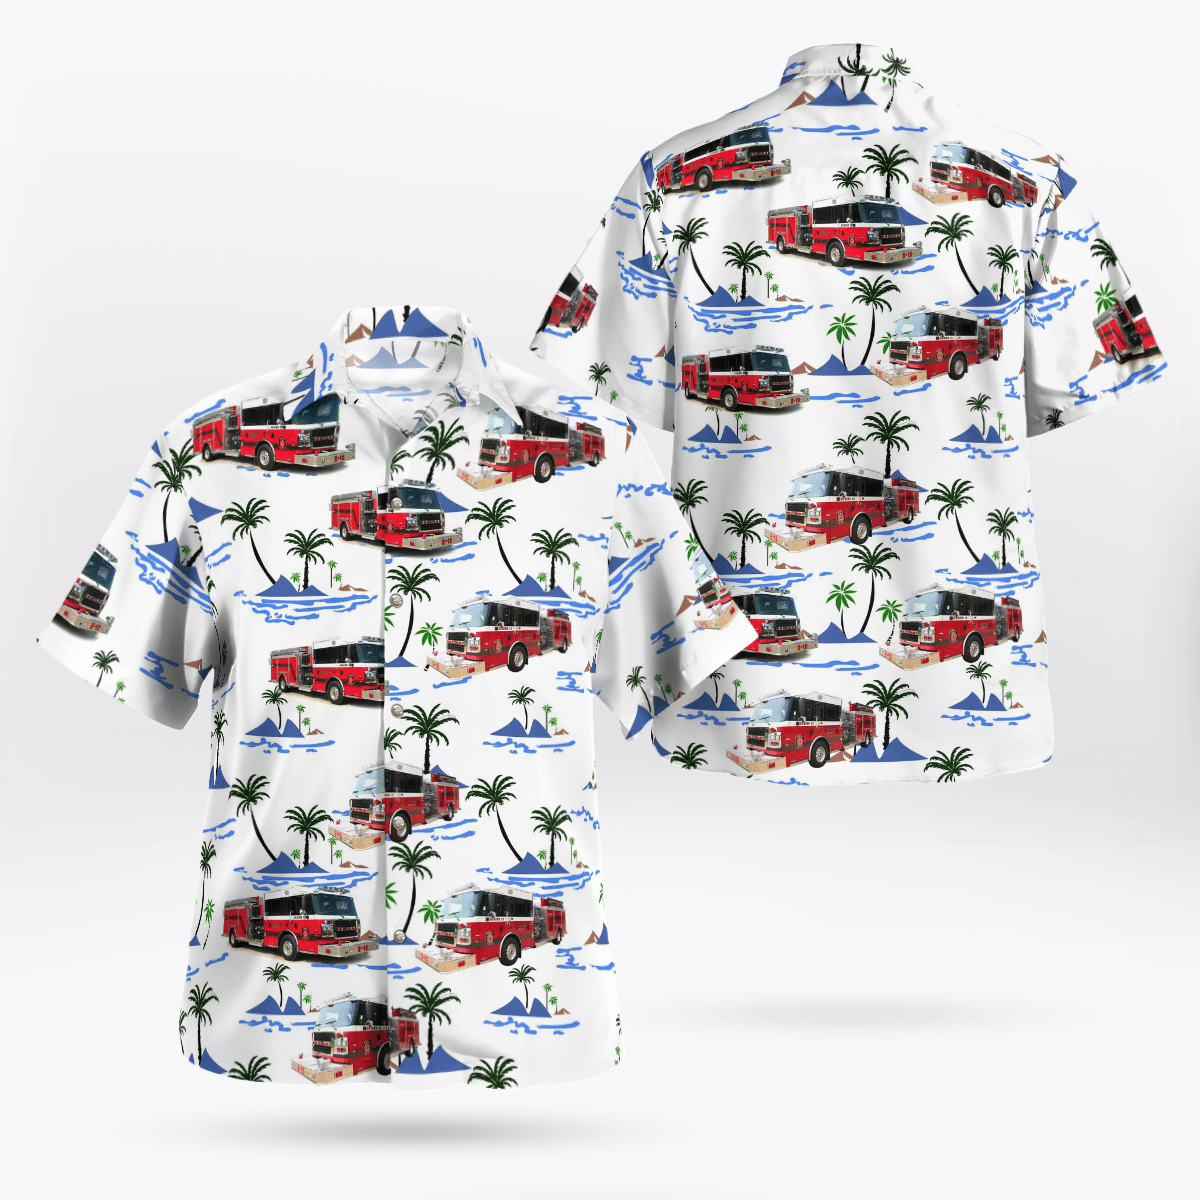 Shop now to find the perfect Hawaii Shirt for your hobby 193